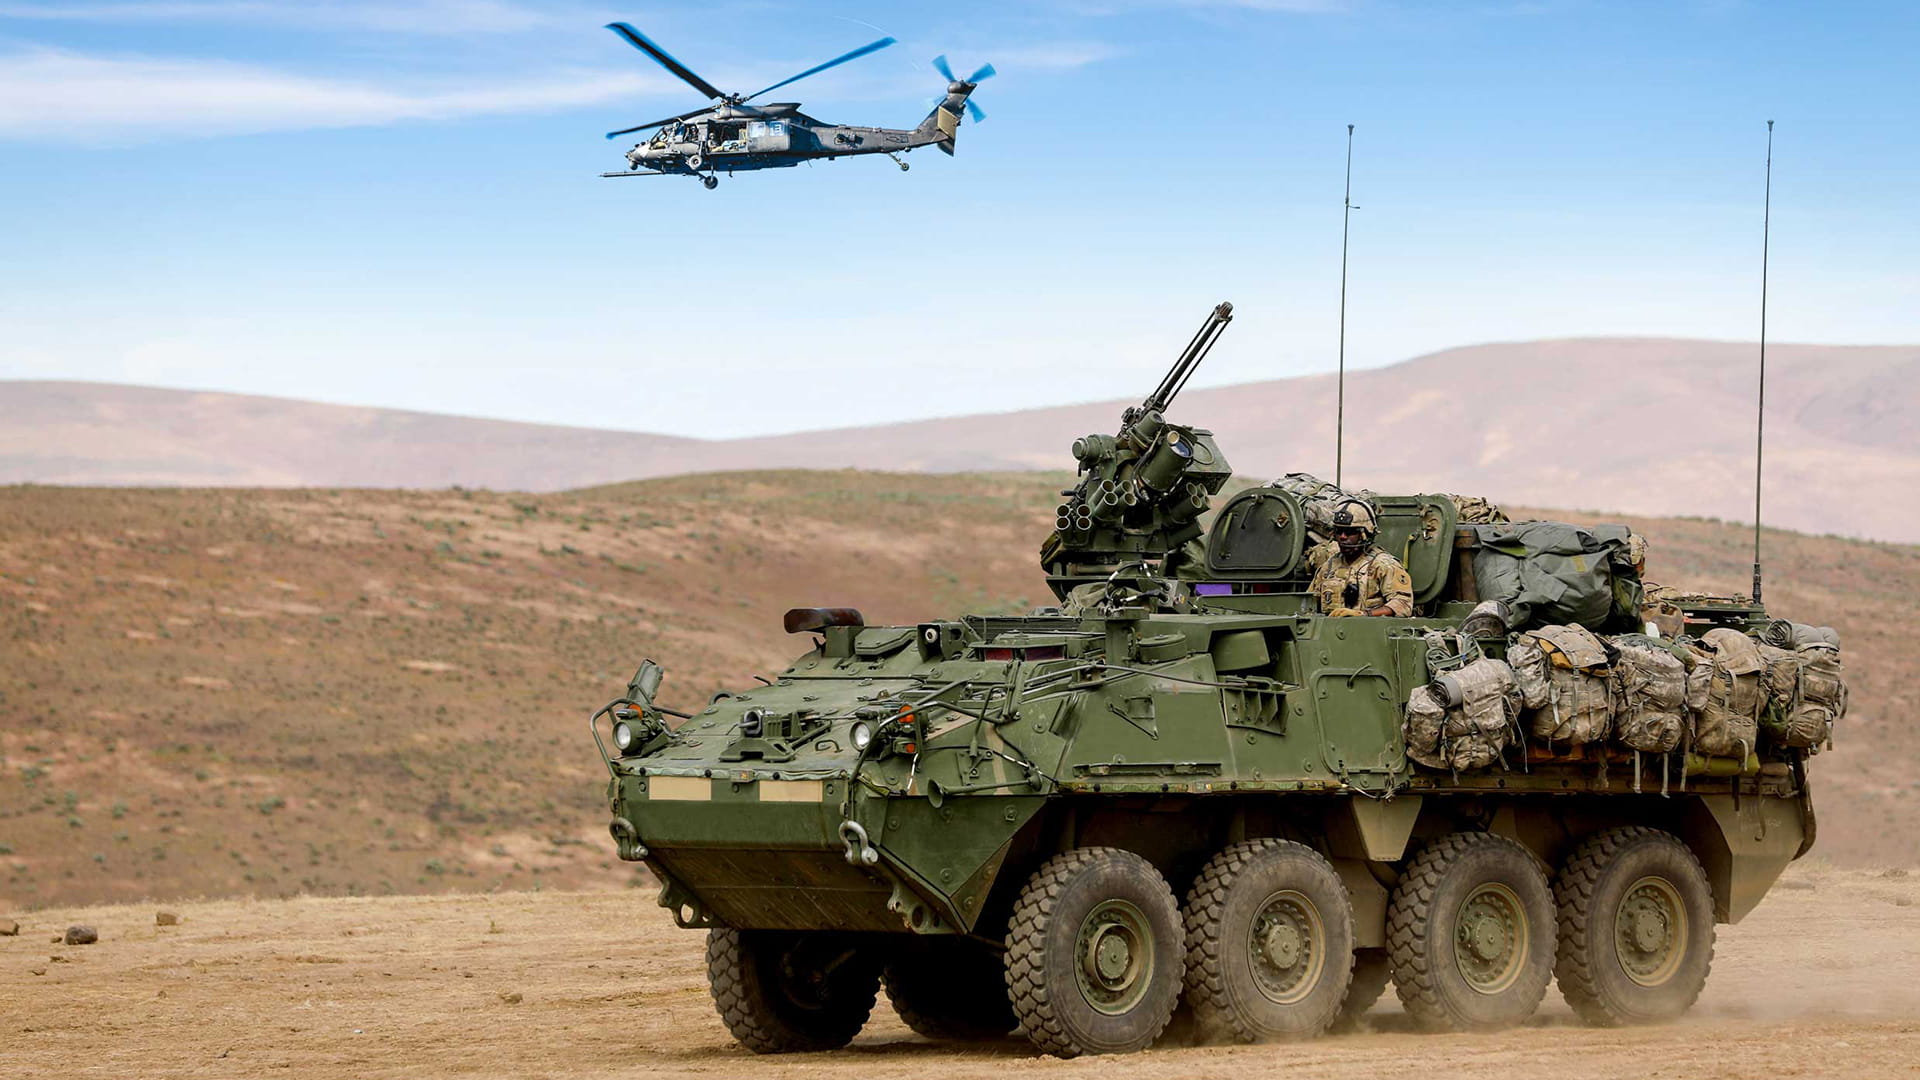 A U.S. Army Stryker tank in the desert. A Black Hawk helicopter can be seen in the sky.